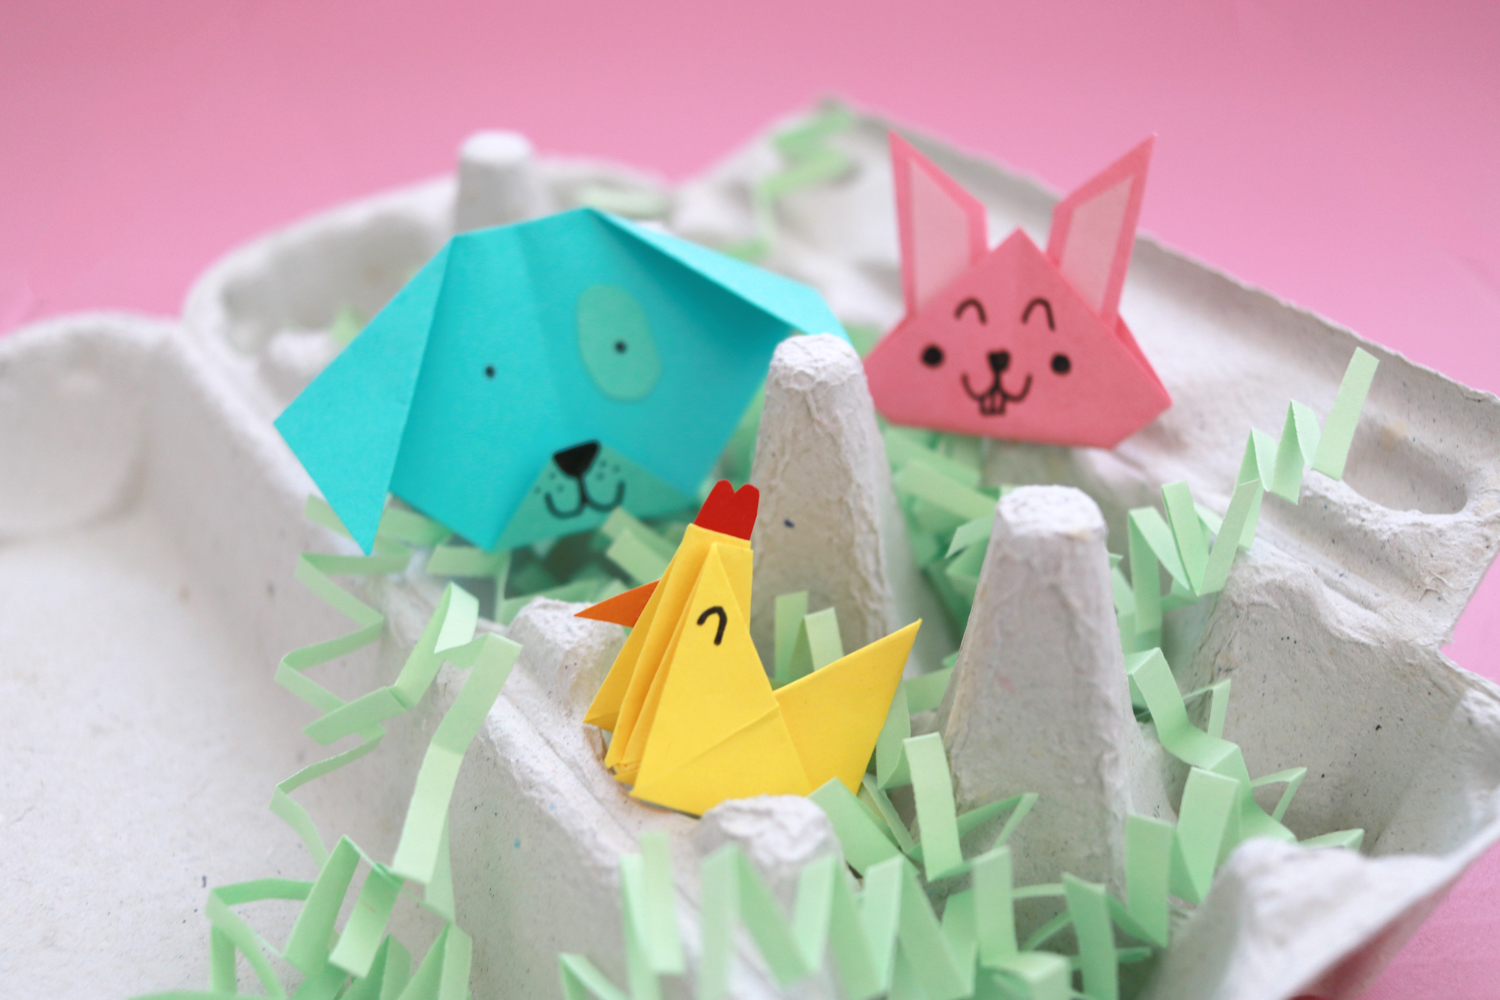 Easy Origami Craft Thing You can Make